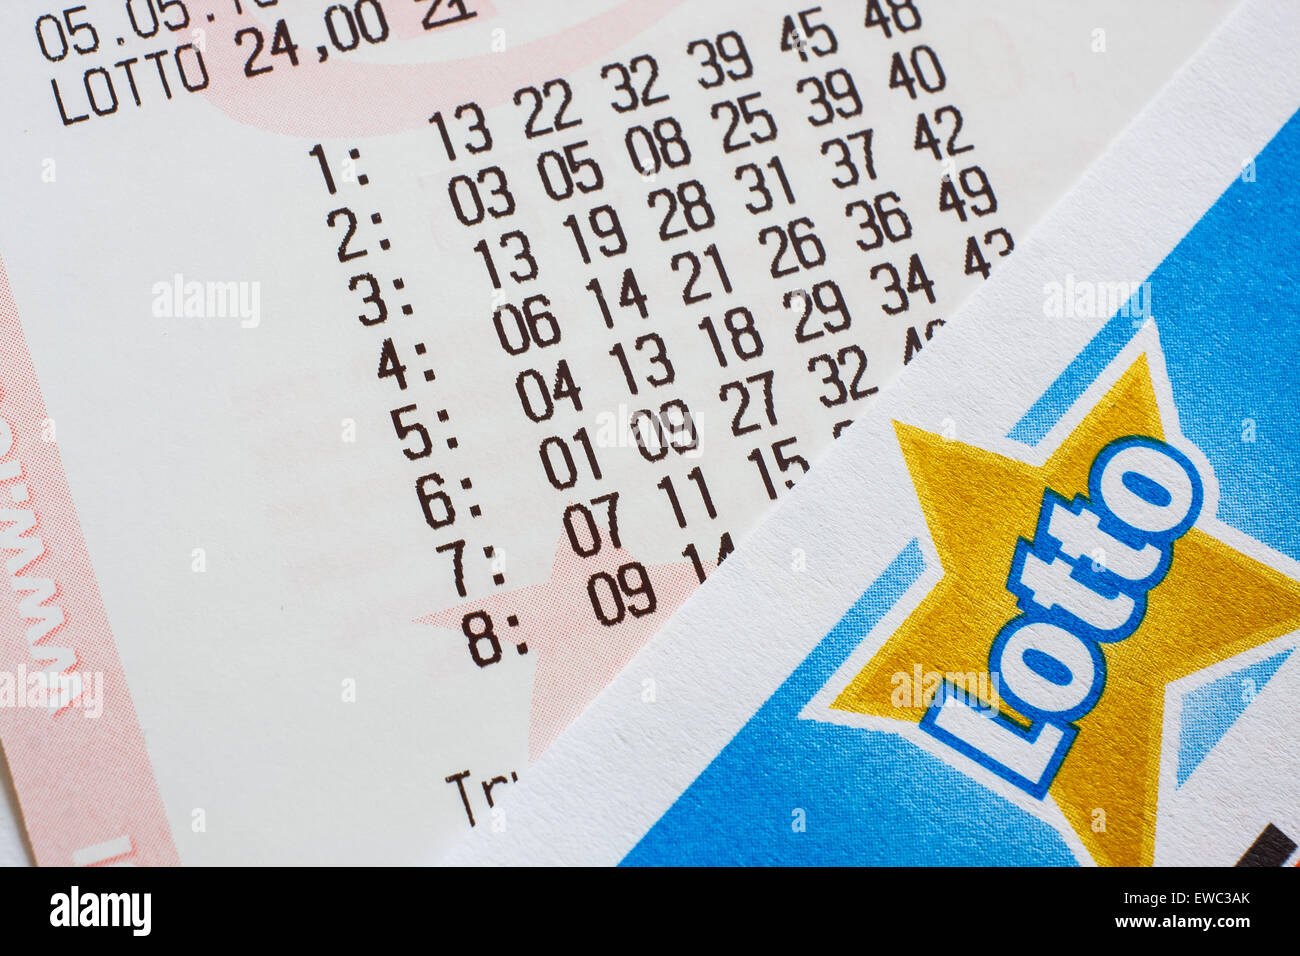 GDANSK, POLAND - MAY 05, 2015. Lotto ticket with numbers Stock Photo